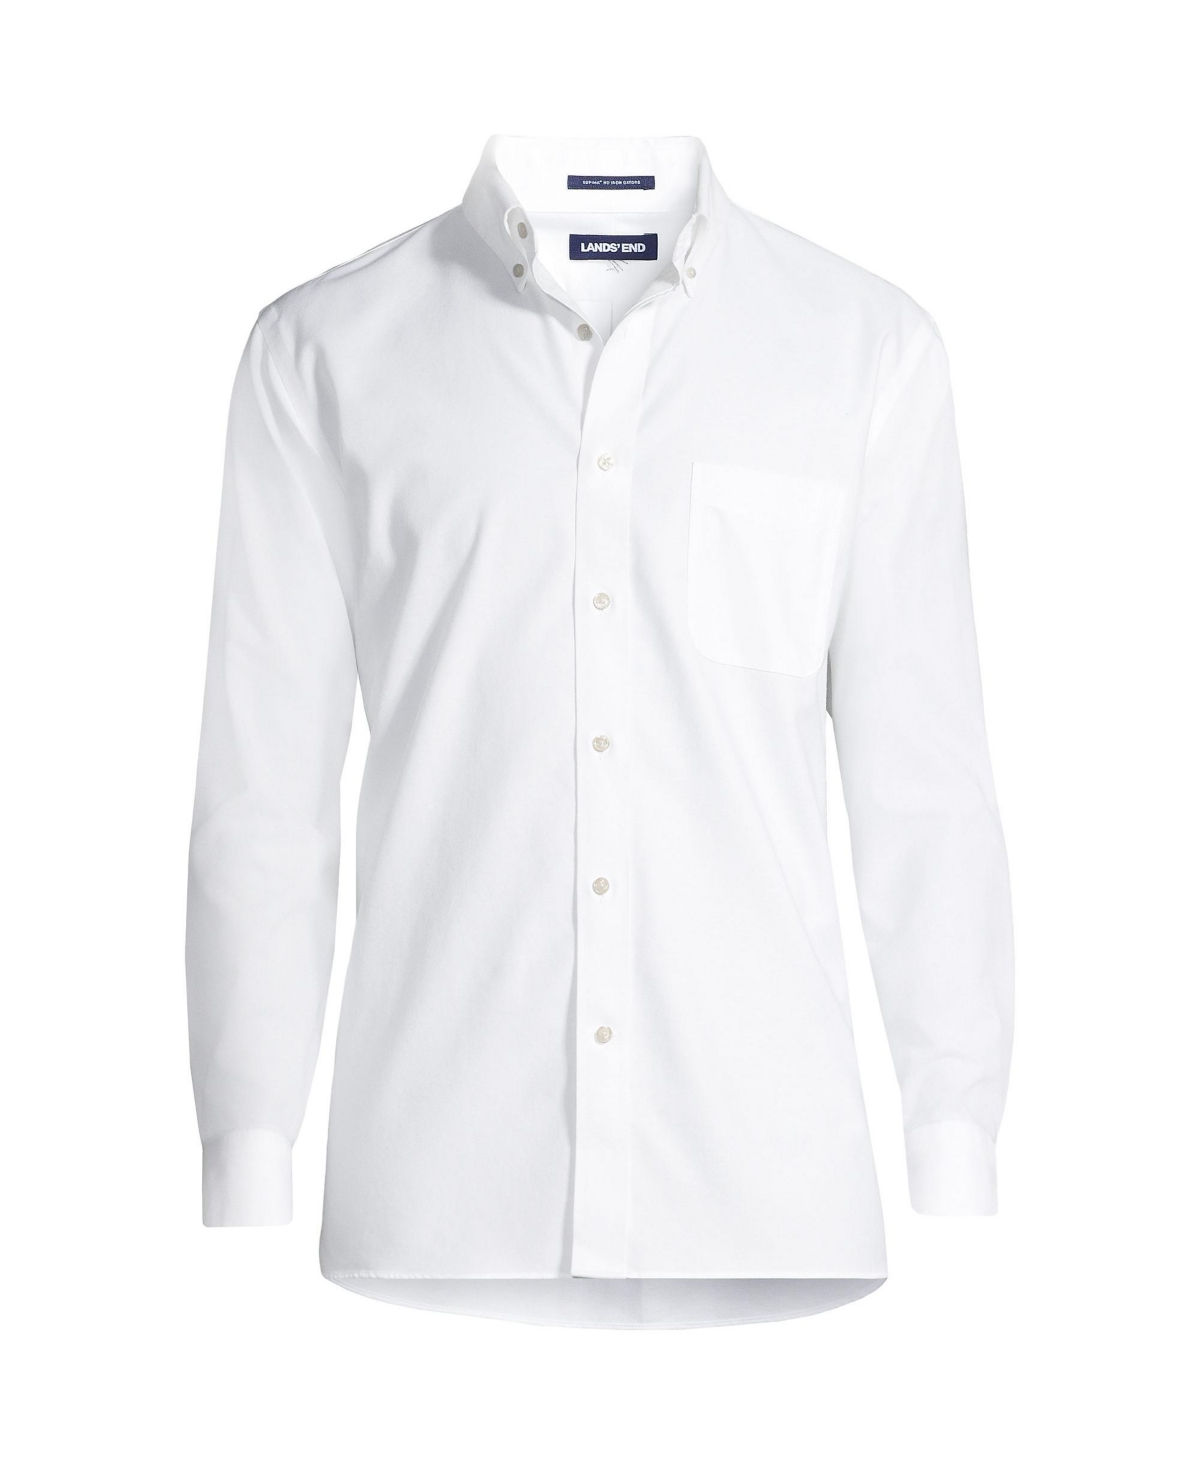 Men's Tall Traditional Fit Solid No Iron Supima Oxford Dress Shirt - White